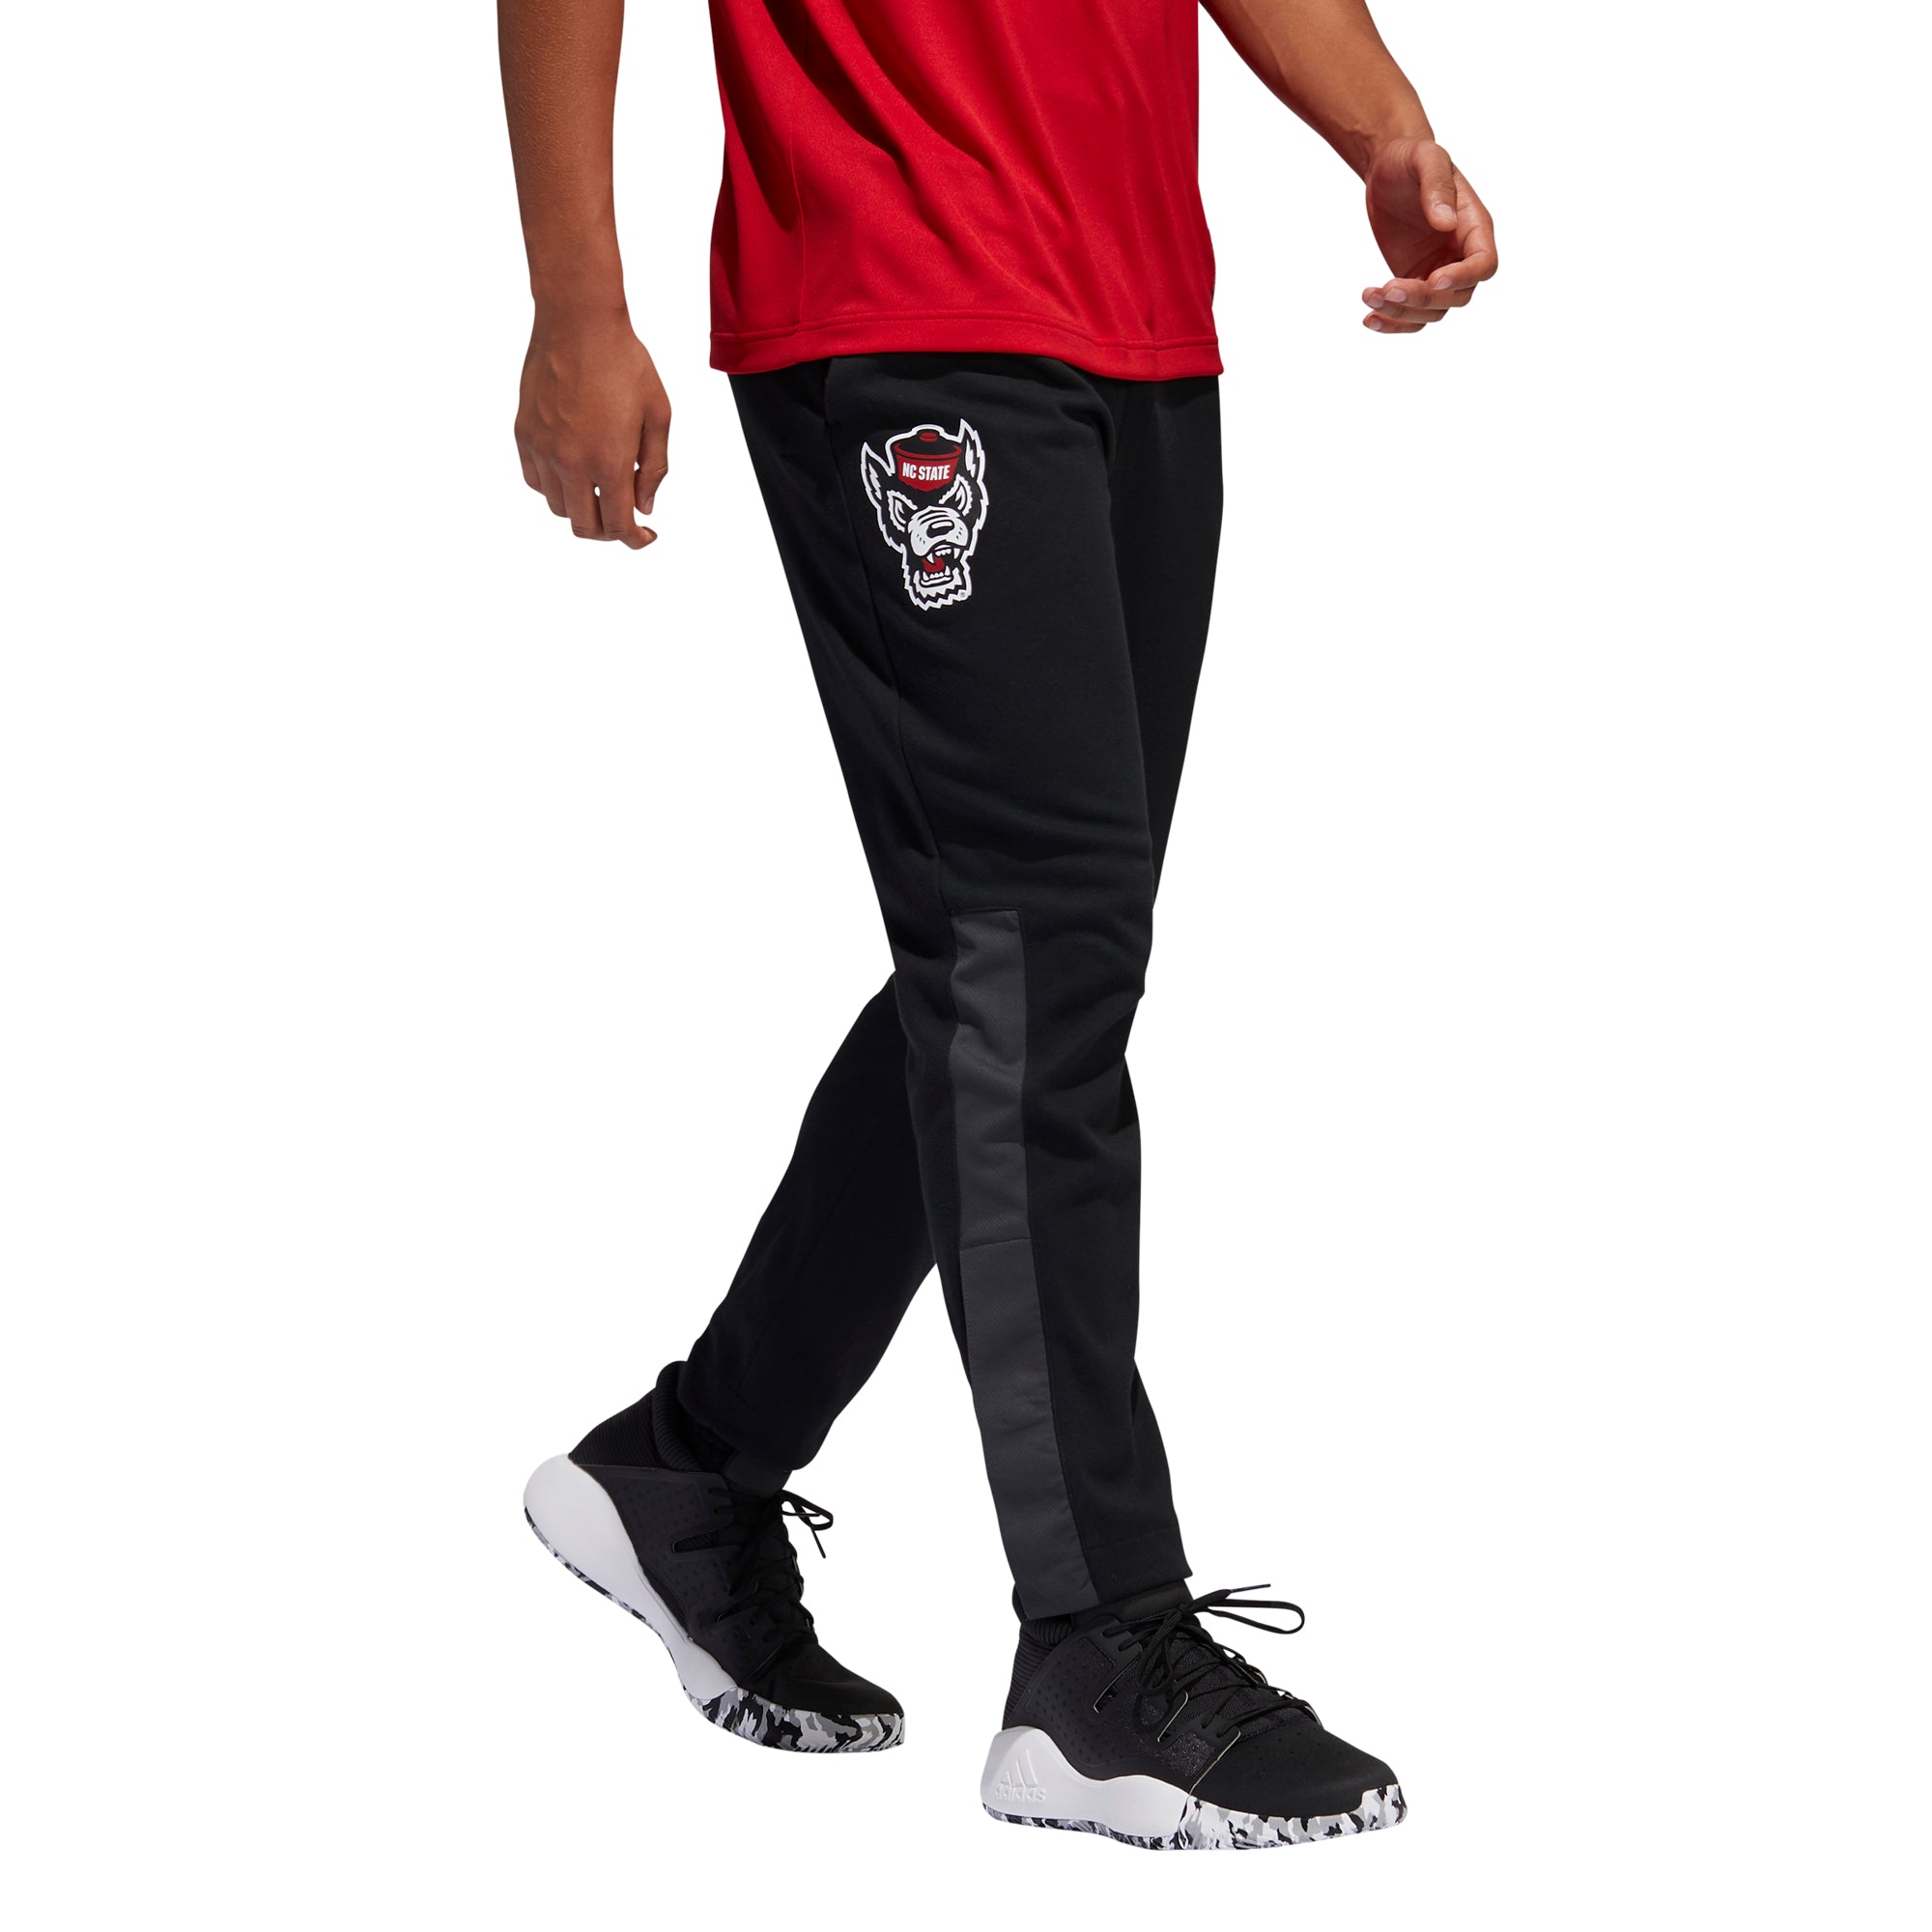 polyester warm up pants